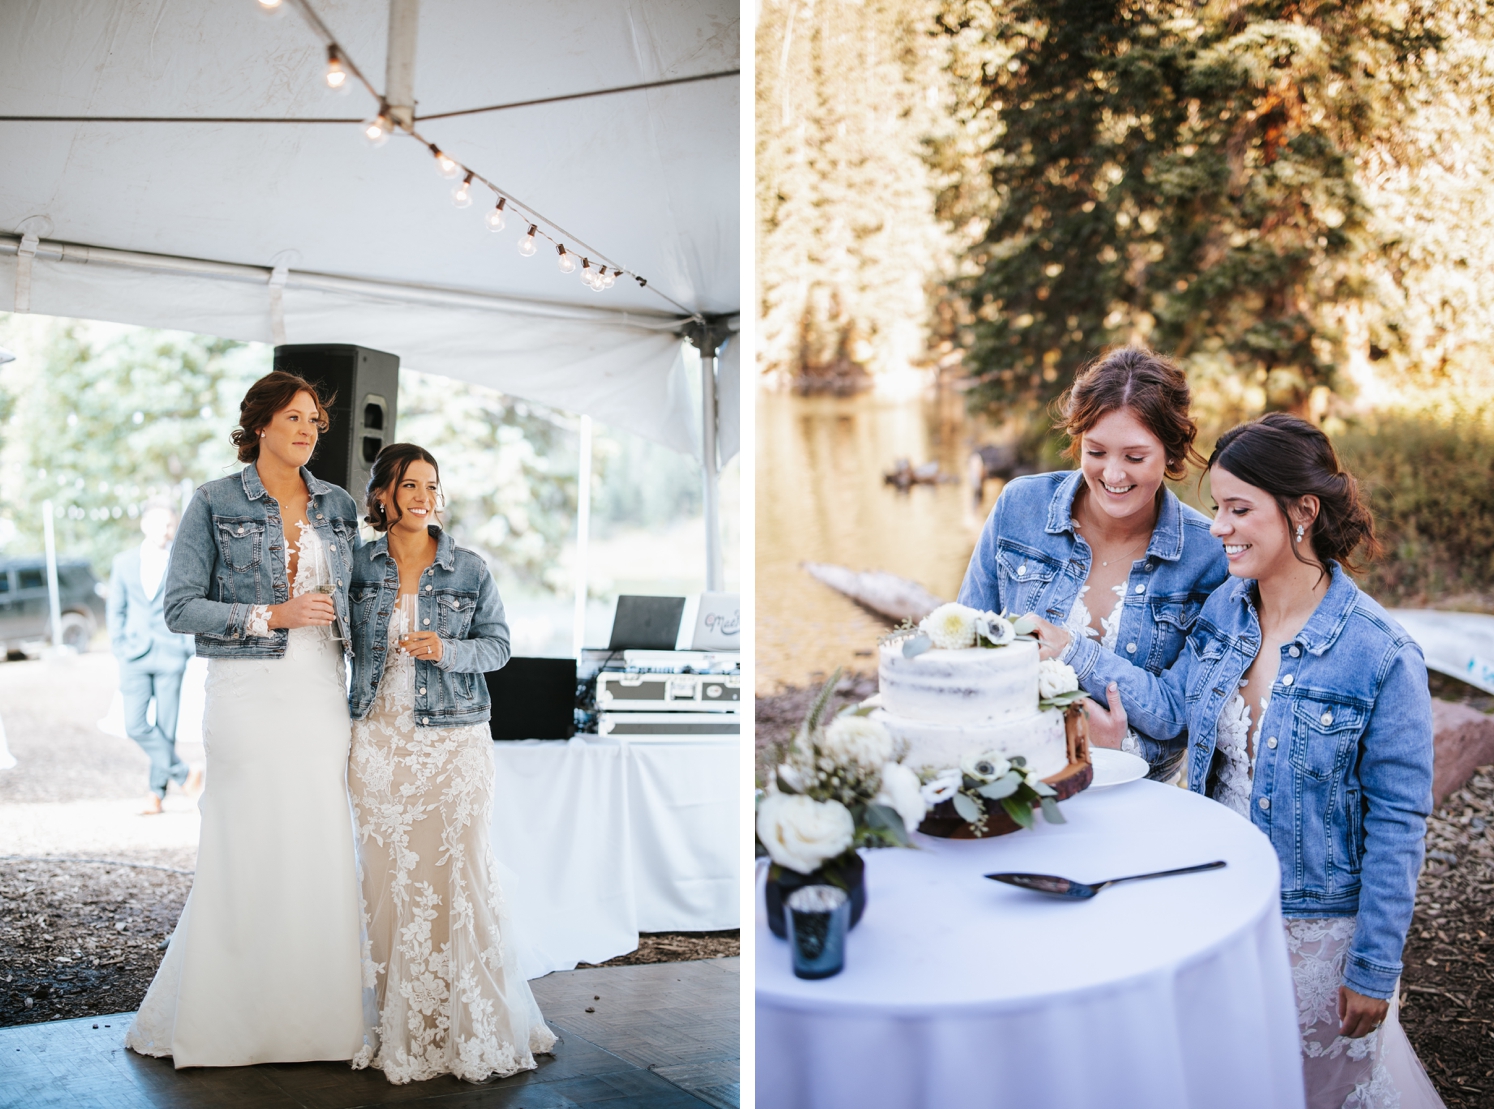 Brides standing next to each other during wedding toasts | brides cutting wedding cake at Telluride wedding | McArthur Weddings and Events